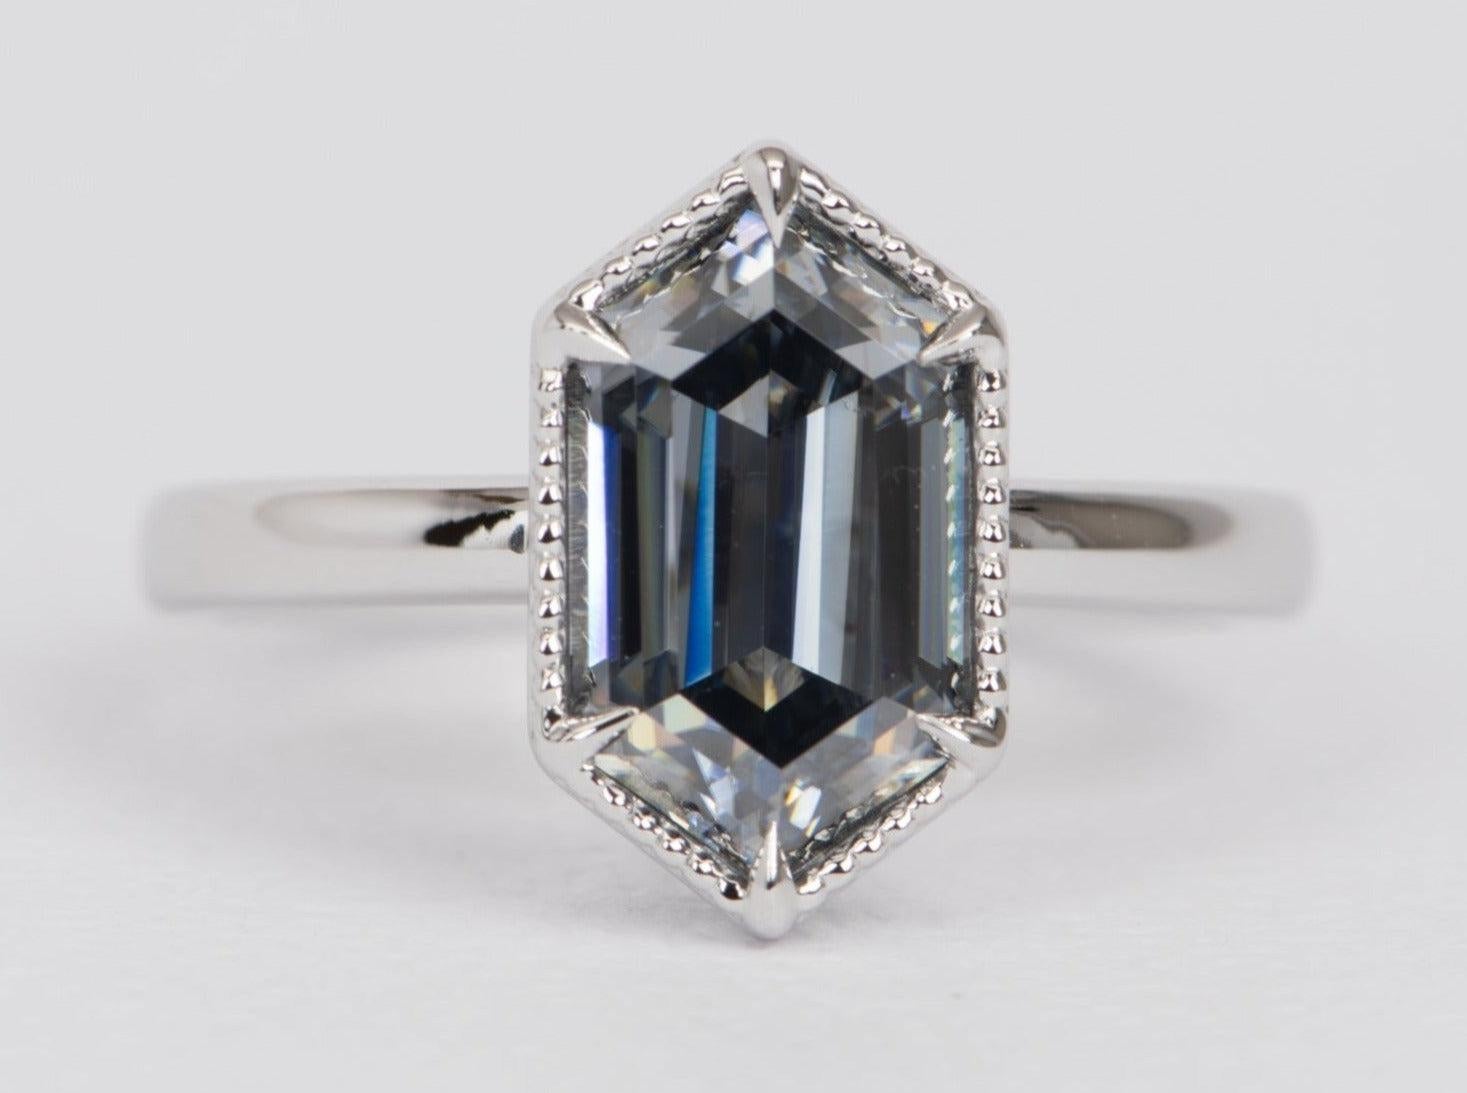 ♥ This is a stunning ring, featuring a large hexagon moissanite
♥ Set in a solid 14K white gold setting
♥ Long V-prong on ends secure the elongated hexagon gemstone; milgrain edge

♥ US Size 7.75 (Free resizing up or down 1 size)
♥ Band width: